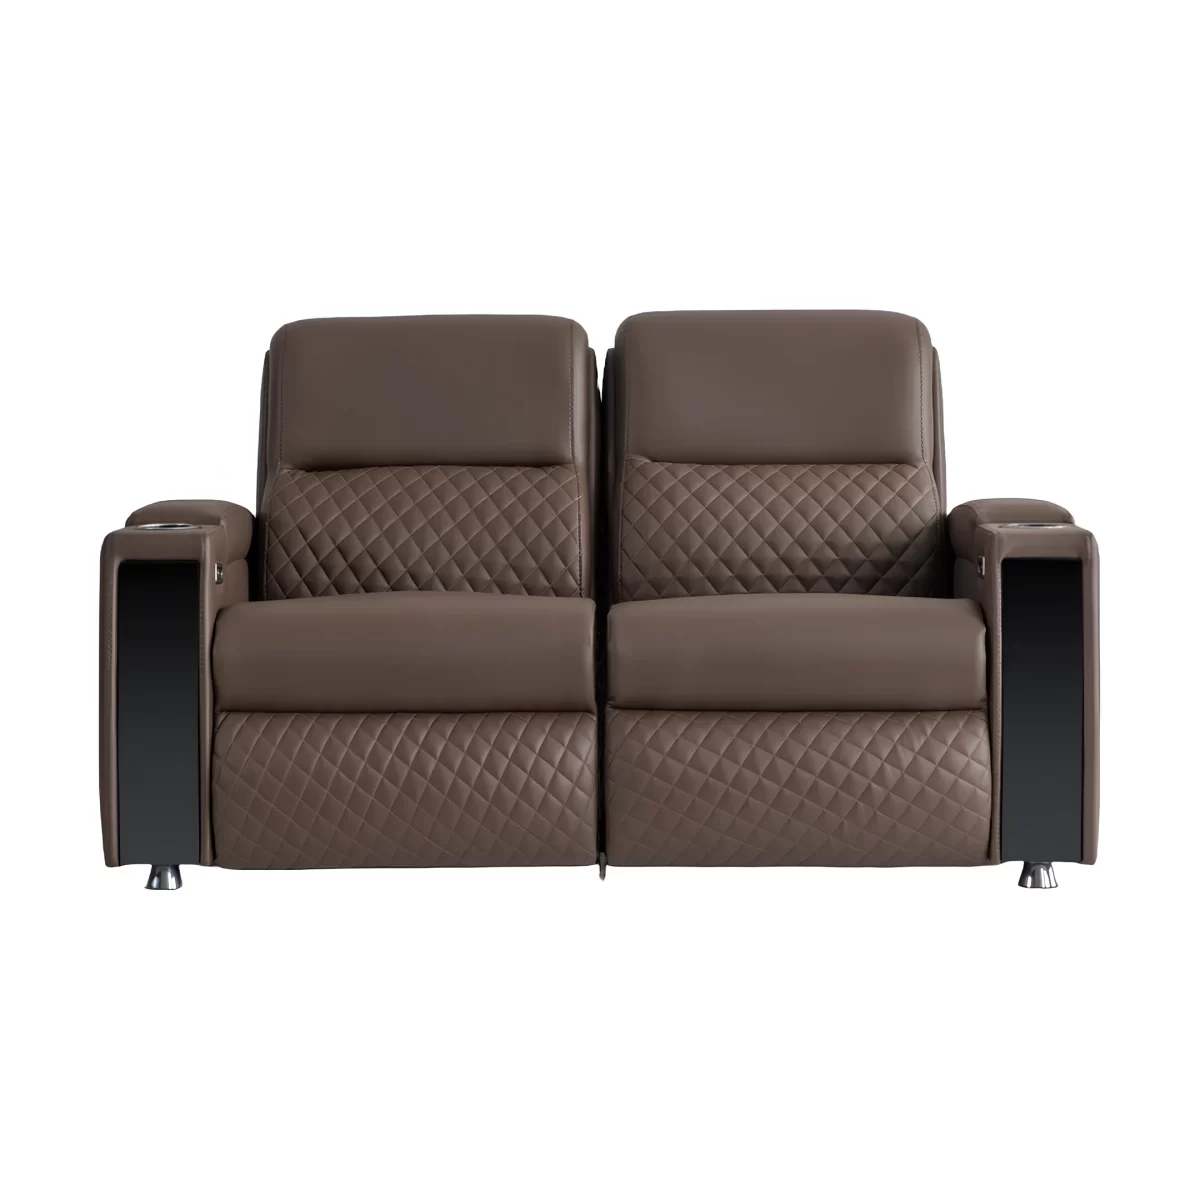 palma double reclining sofa electric recliner for home theater loveseat